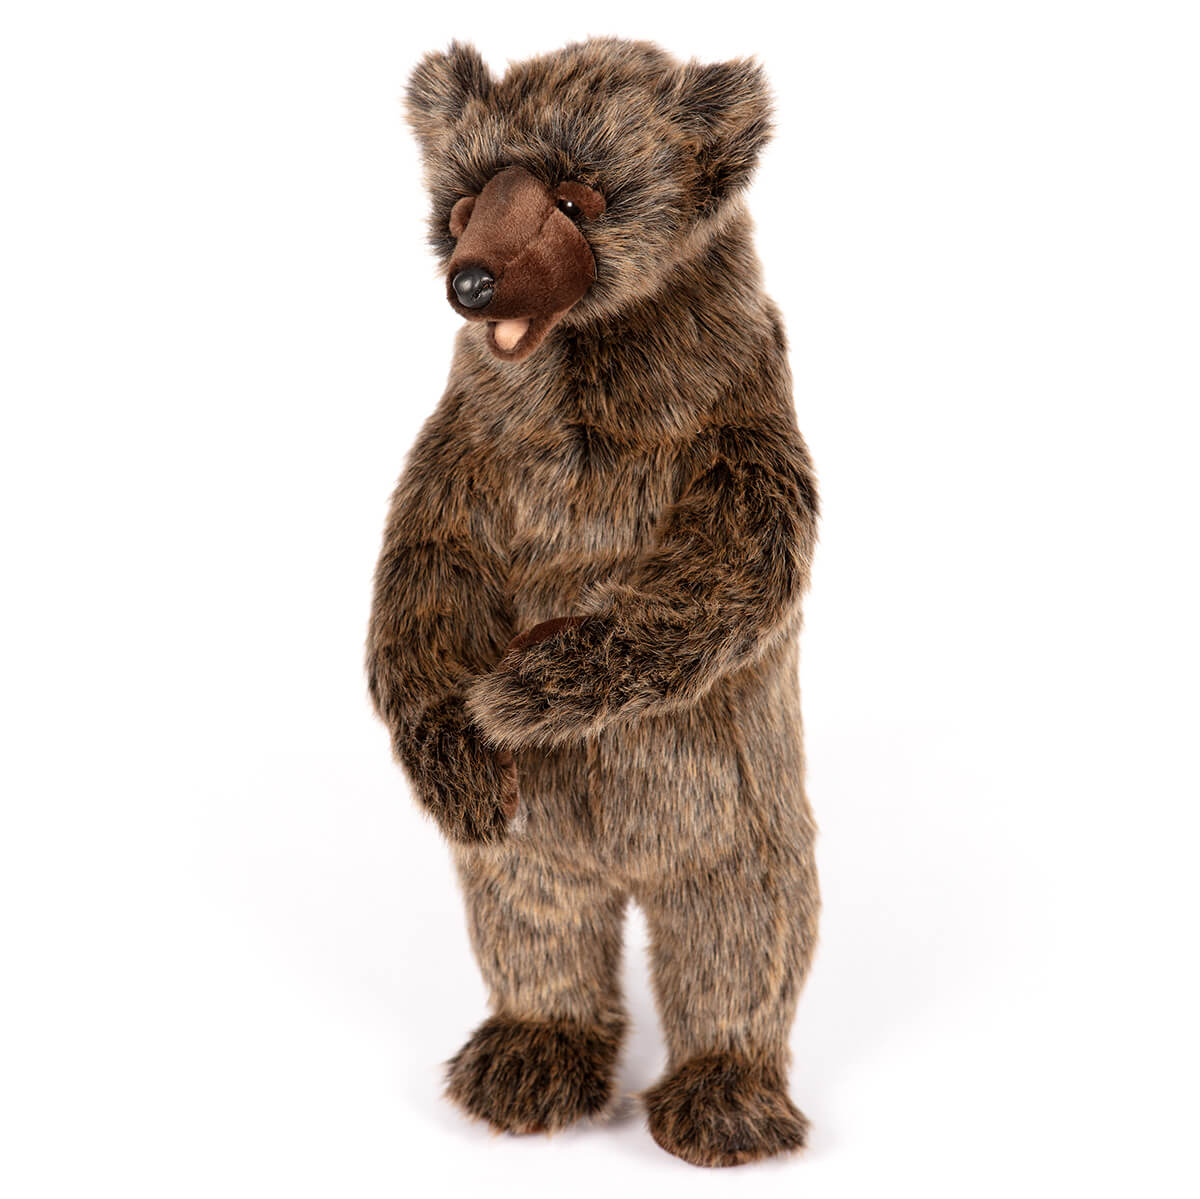 Large Grizzly Bear Standing (50cm) by Hansa – Junior Edition